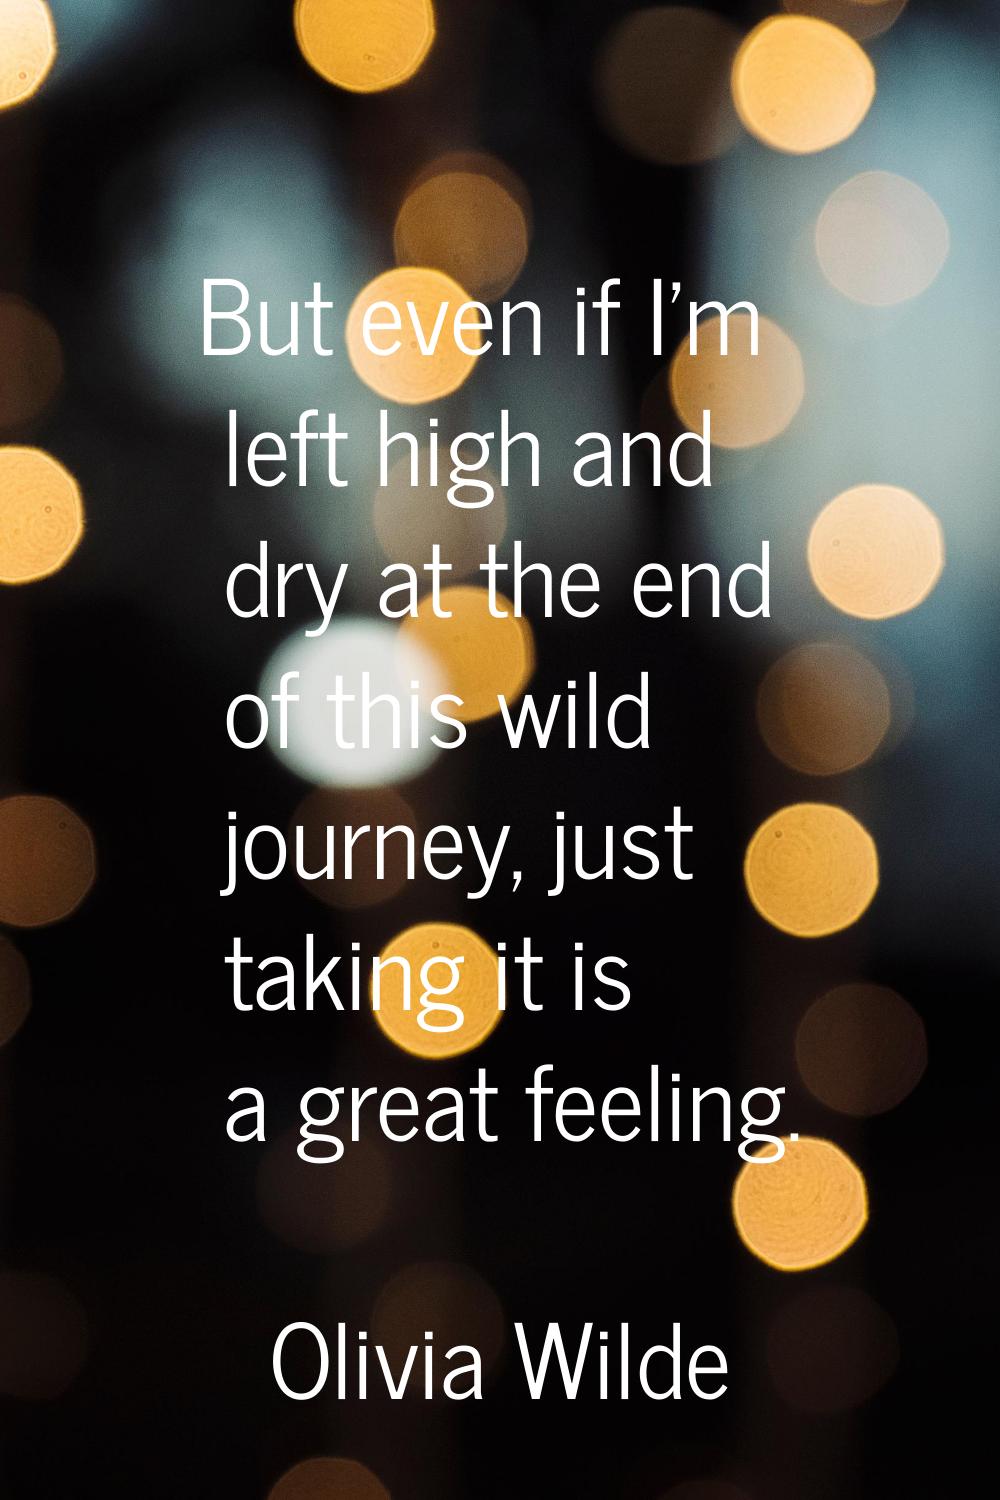 But even if I'm left high and dry at the end of this wild journey, just taking it is a great feelin